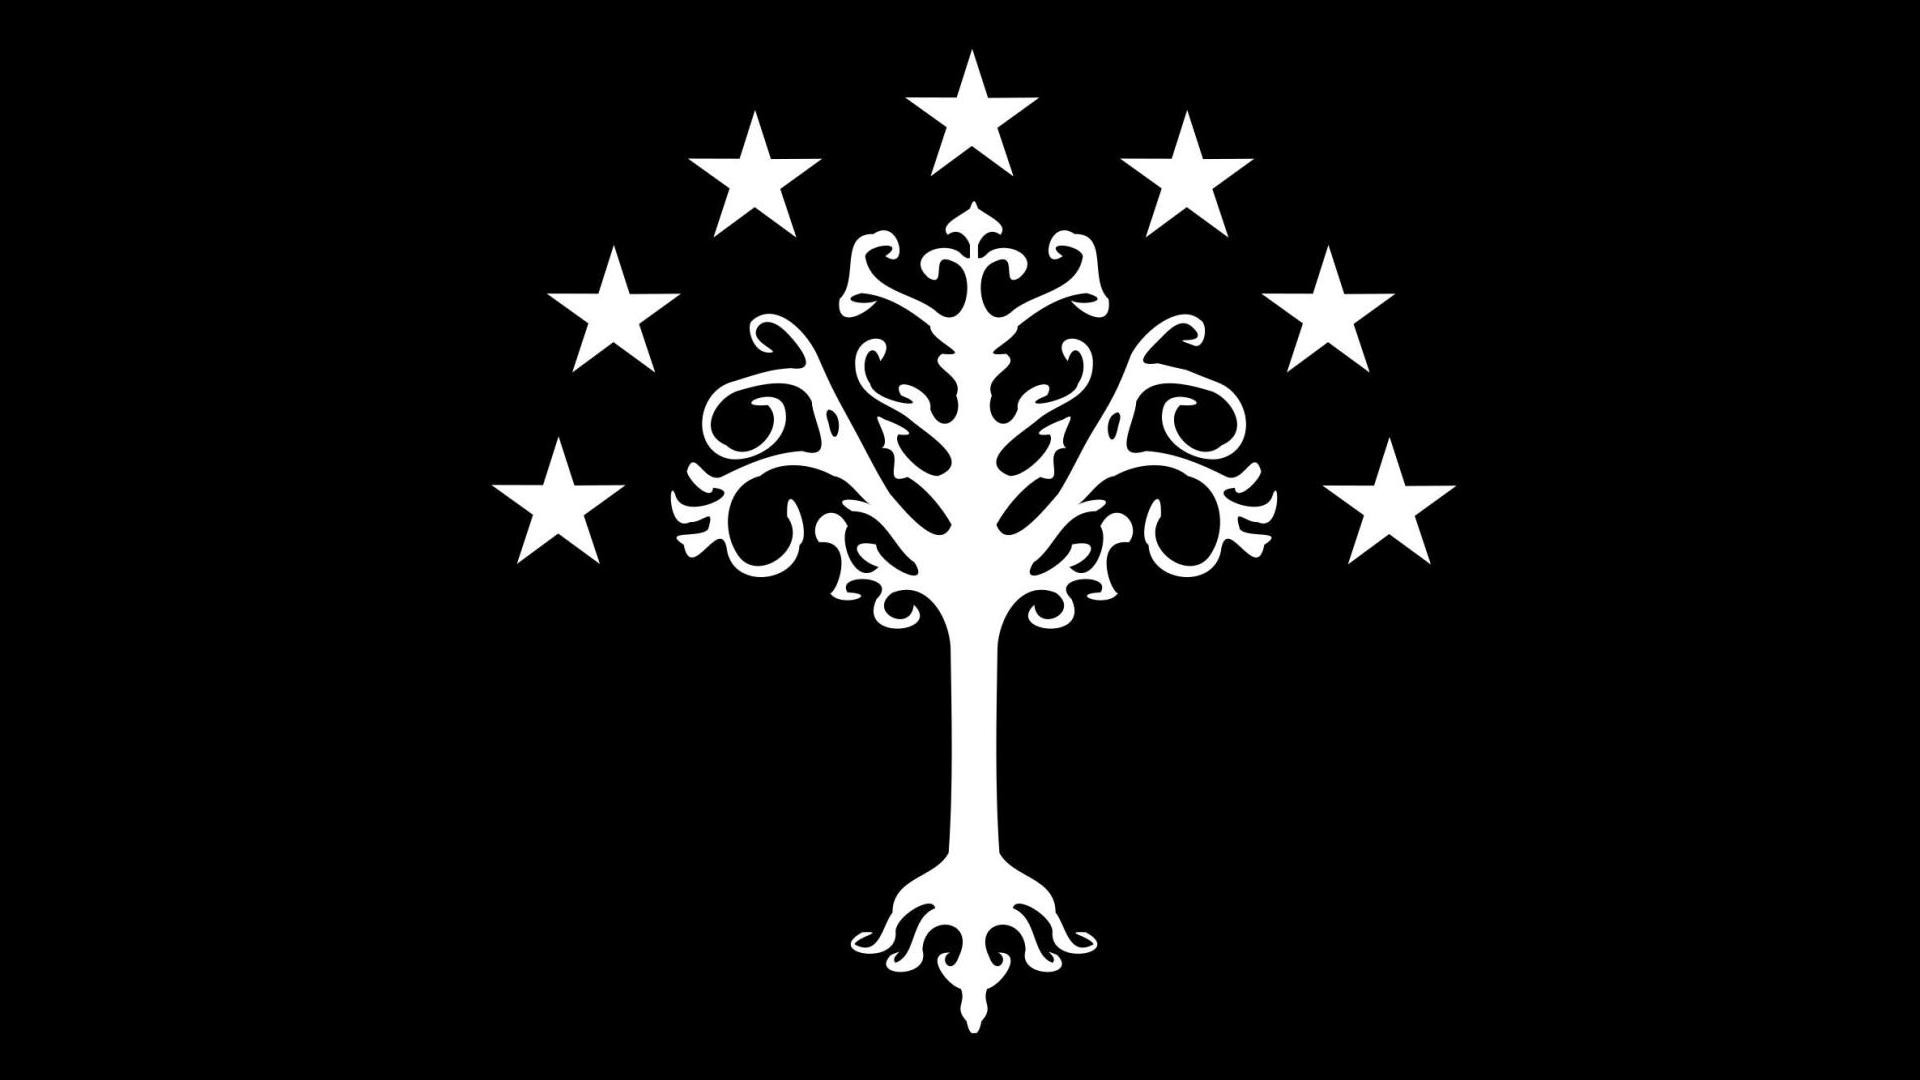 the, Lord, Of, The, Rings, Flags, White, Tree, Gondor Wallpaper